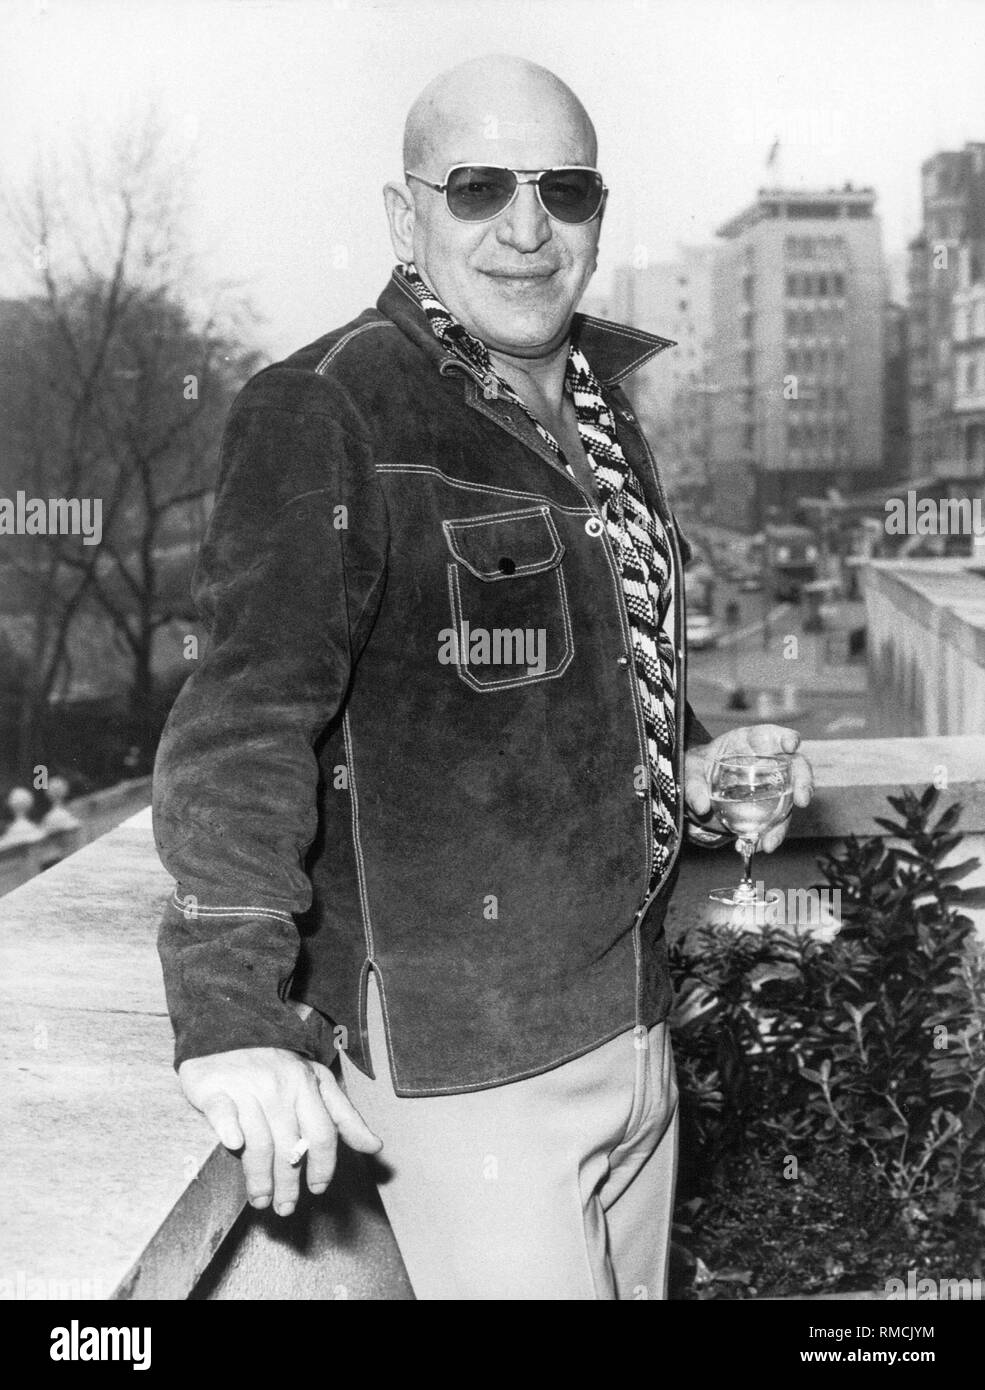 Telly Savalas (1924-1994), an American actor. Undated photo, probably from the end of the 1970s. Stock Photo